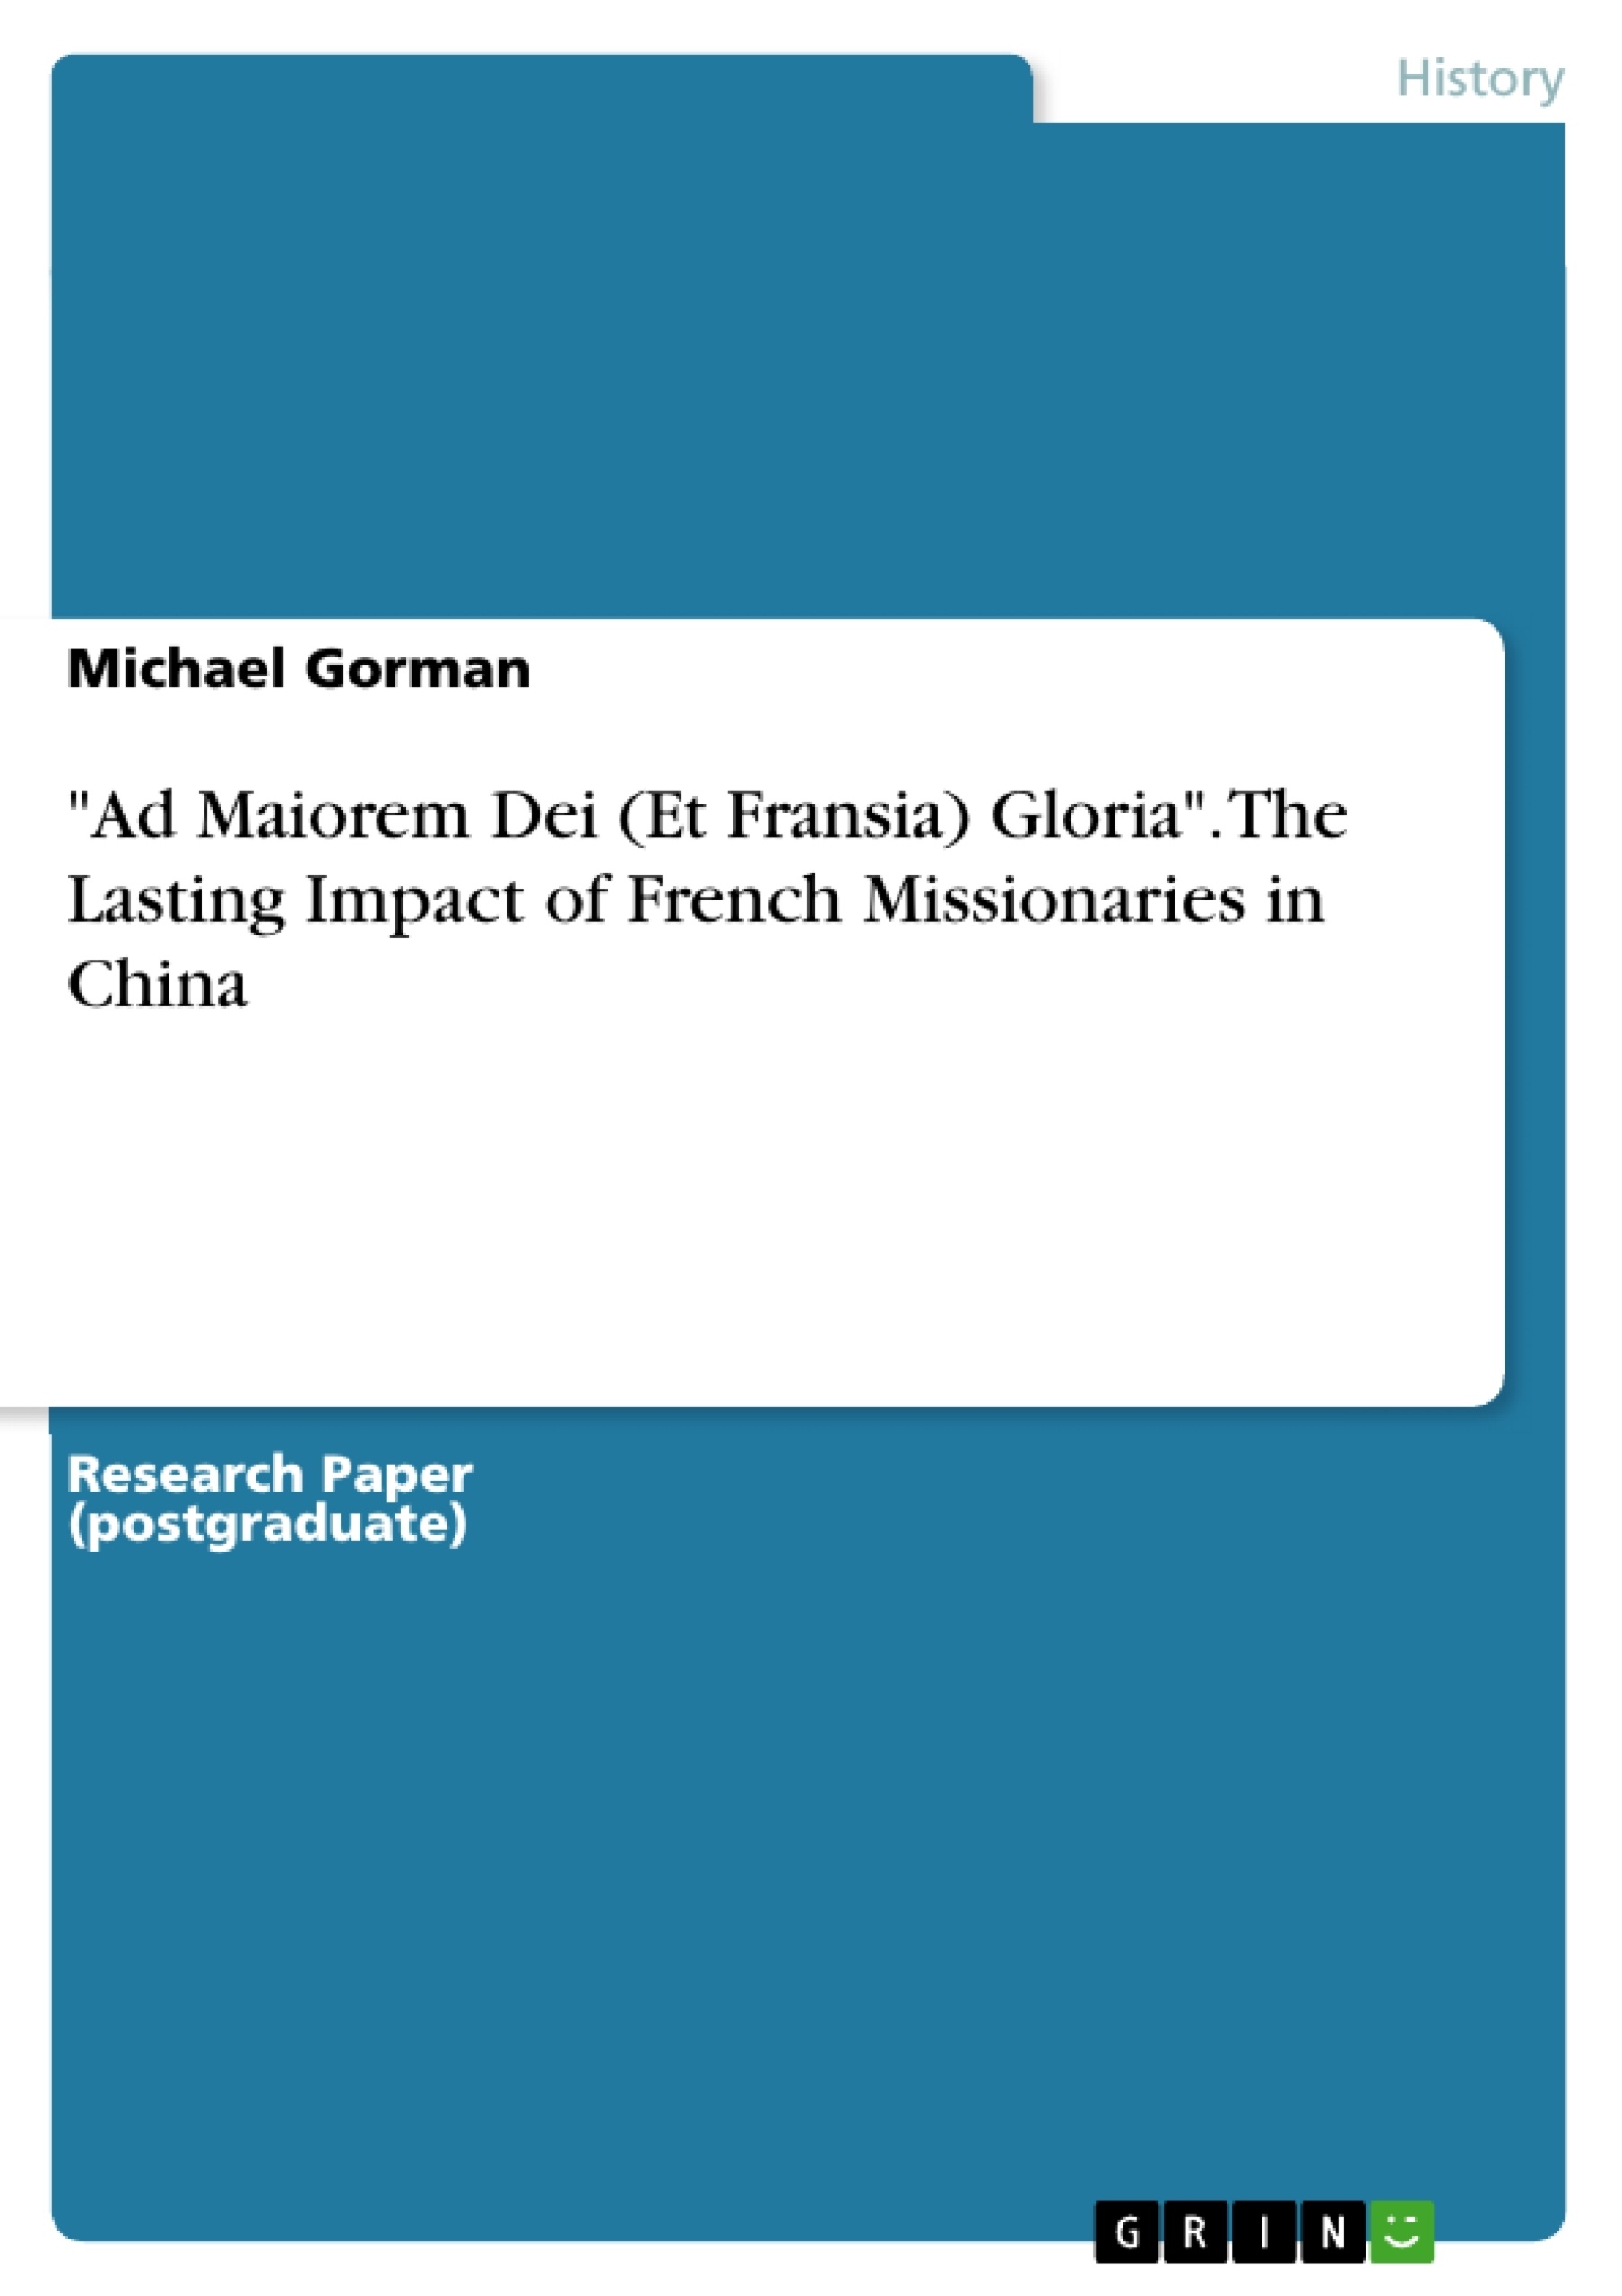 Titre: "Ad Maiorem Dei (Et Fransia) Gloria". The Lasting Impact of French Missionaries in China